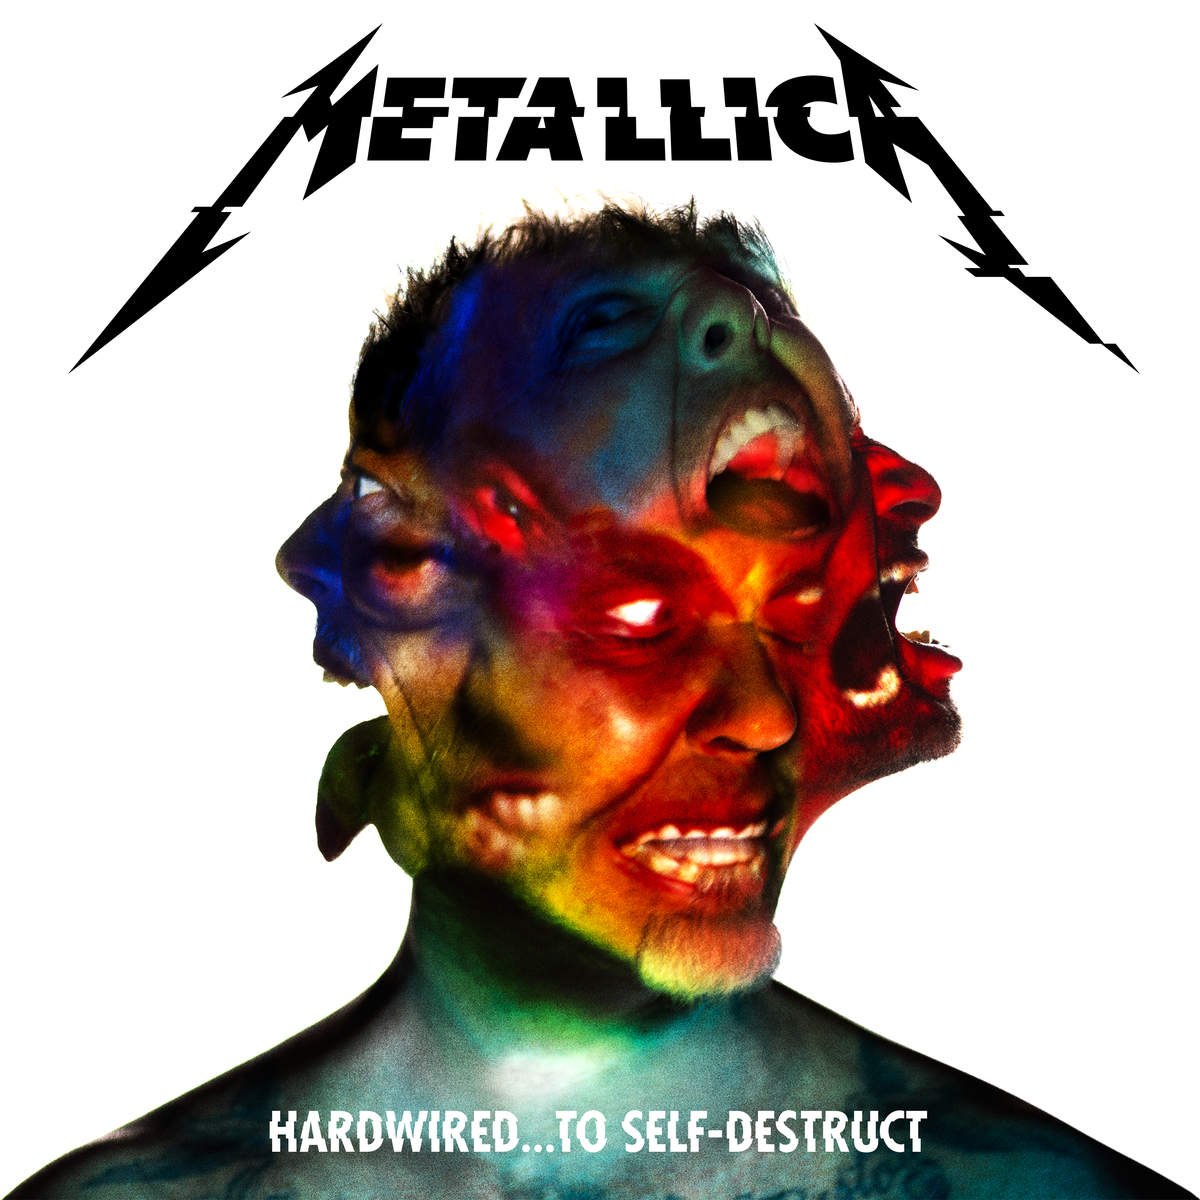 Metallica-Hardwired To Self-Destruct-Deluxe Edition-3CD-FLAC-2016-RiBS